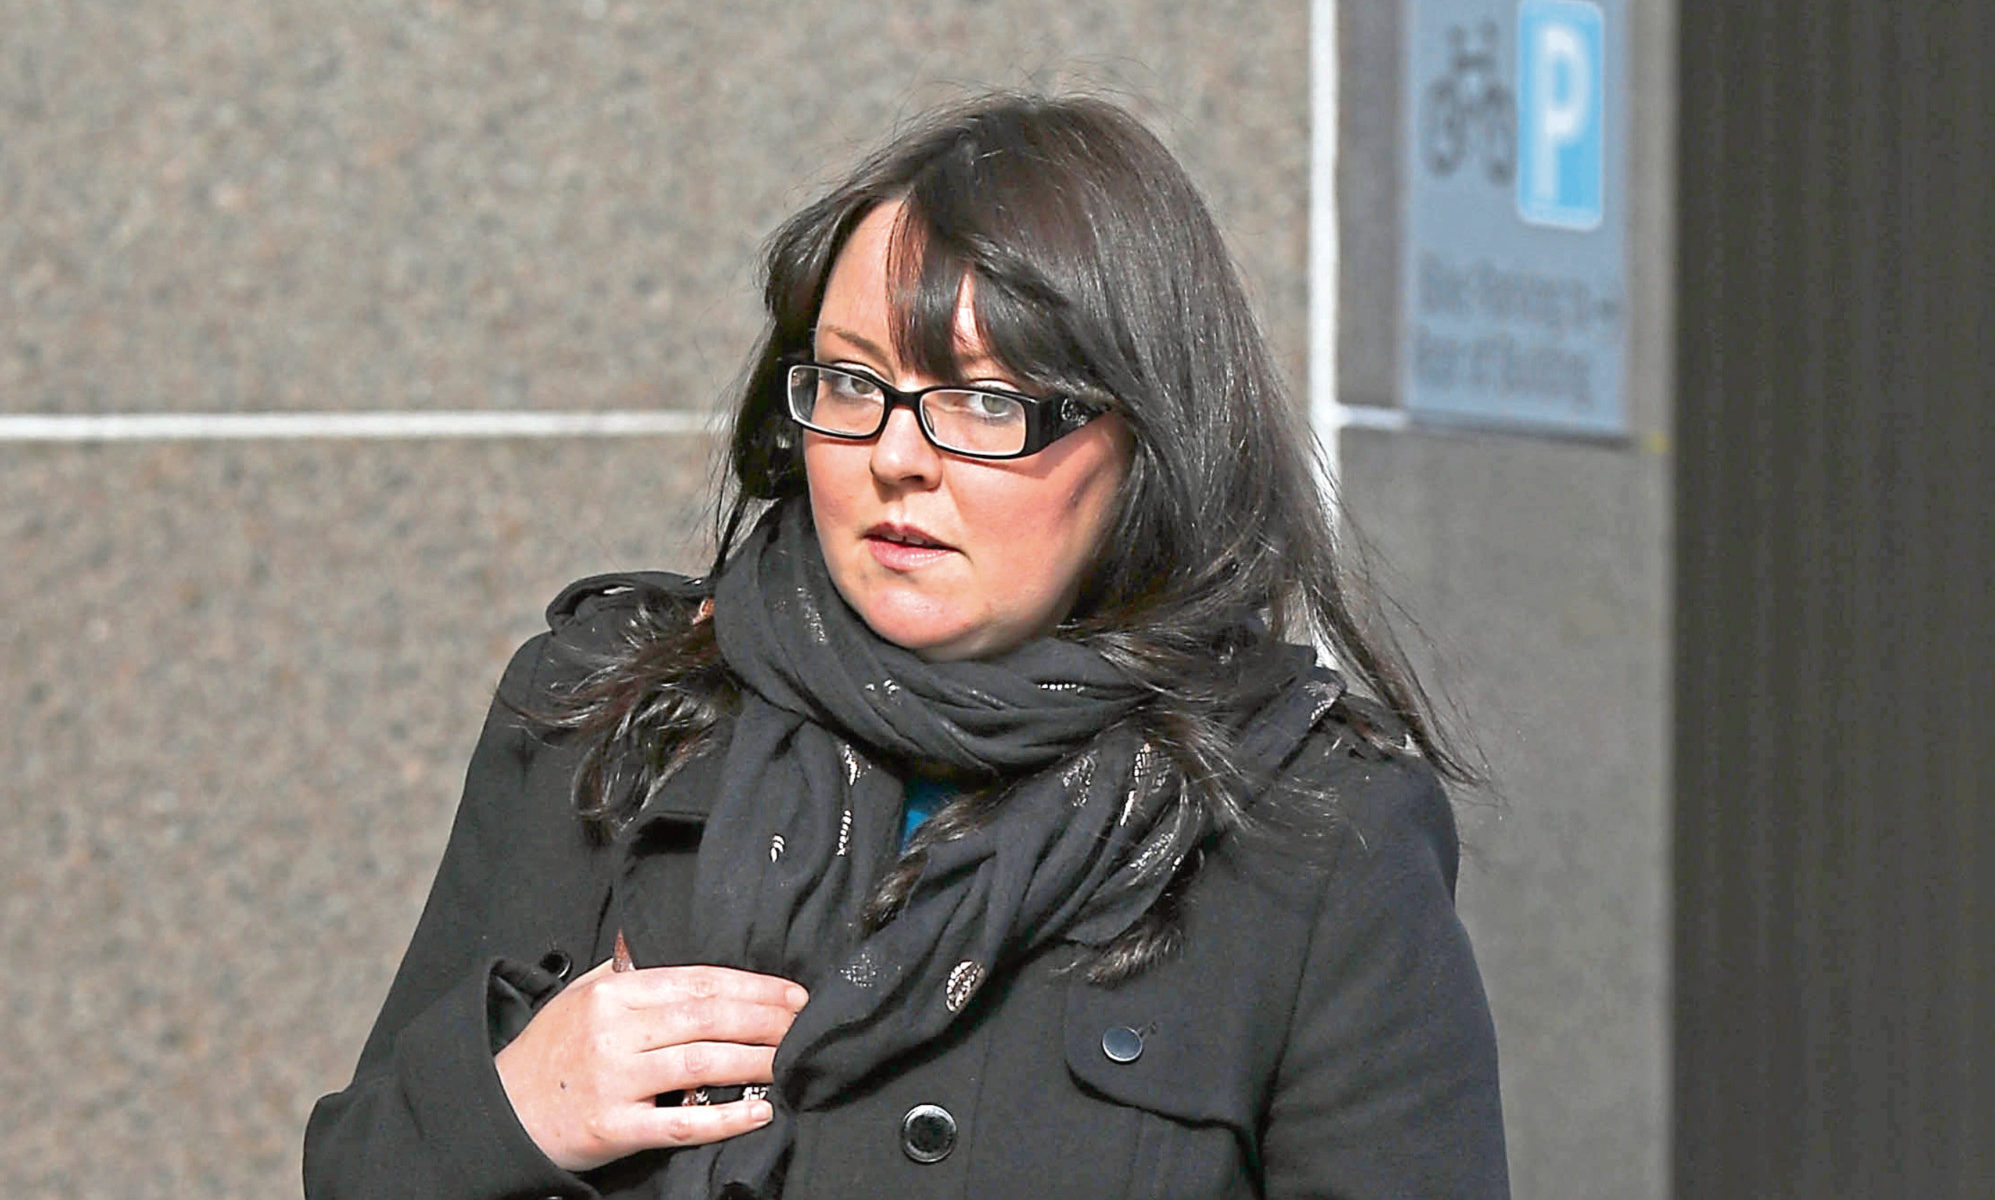 The proceeds of crime hearing against Natalie McGarry has concluded.